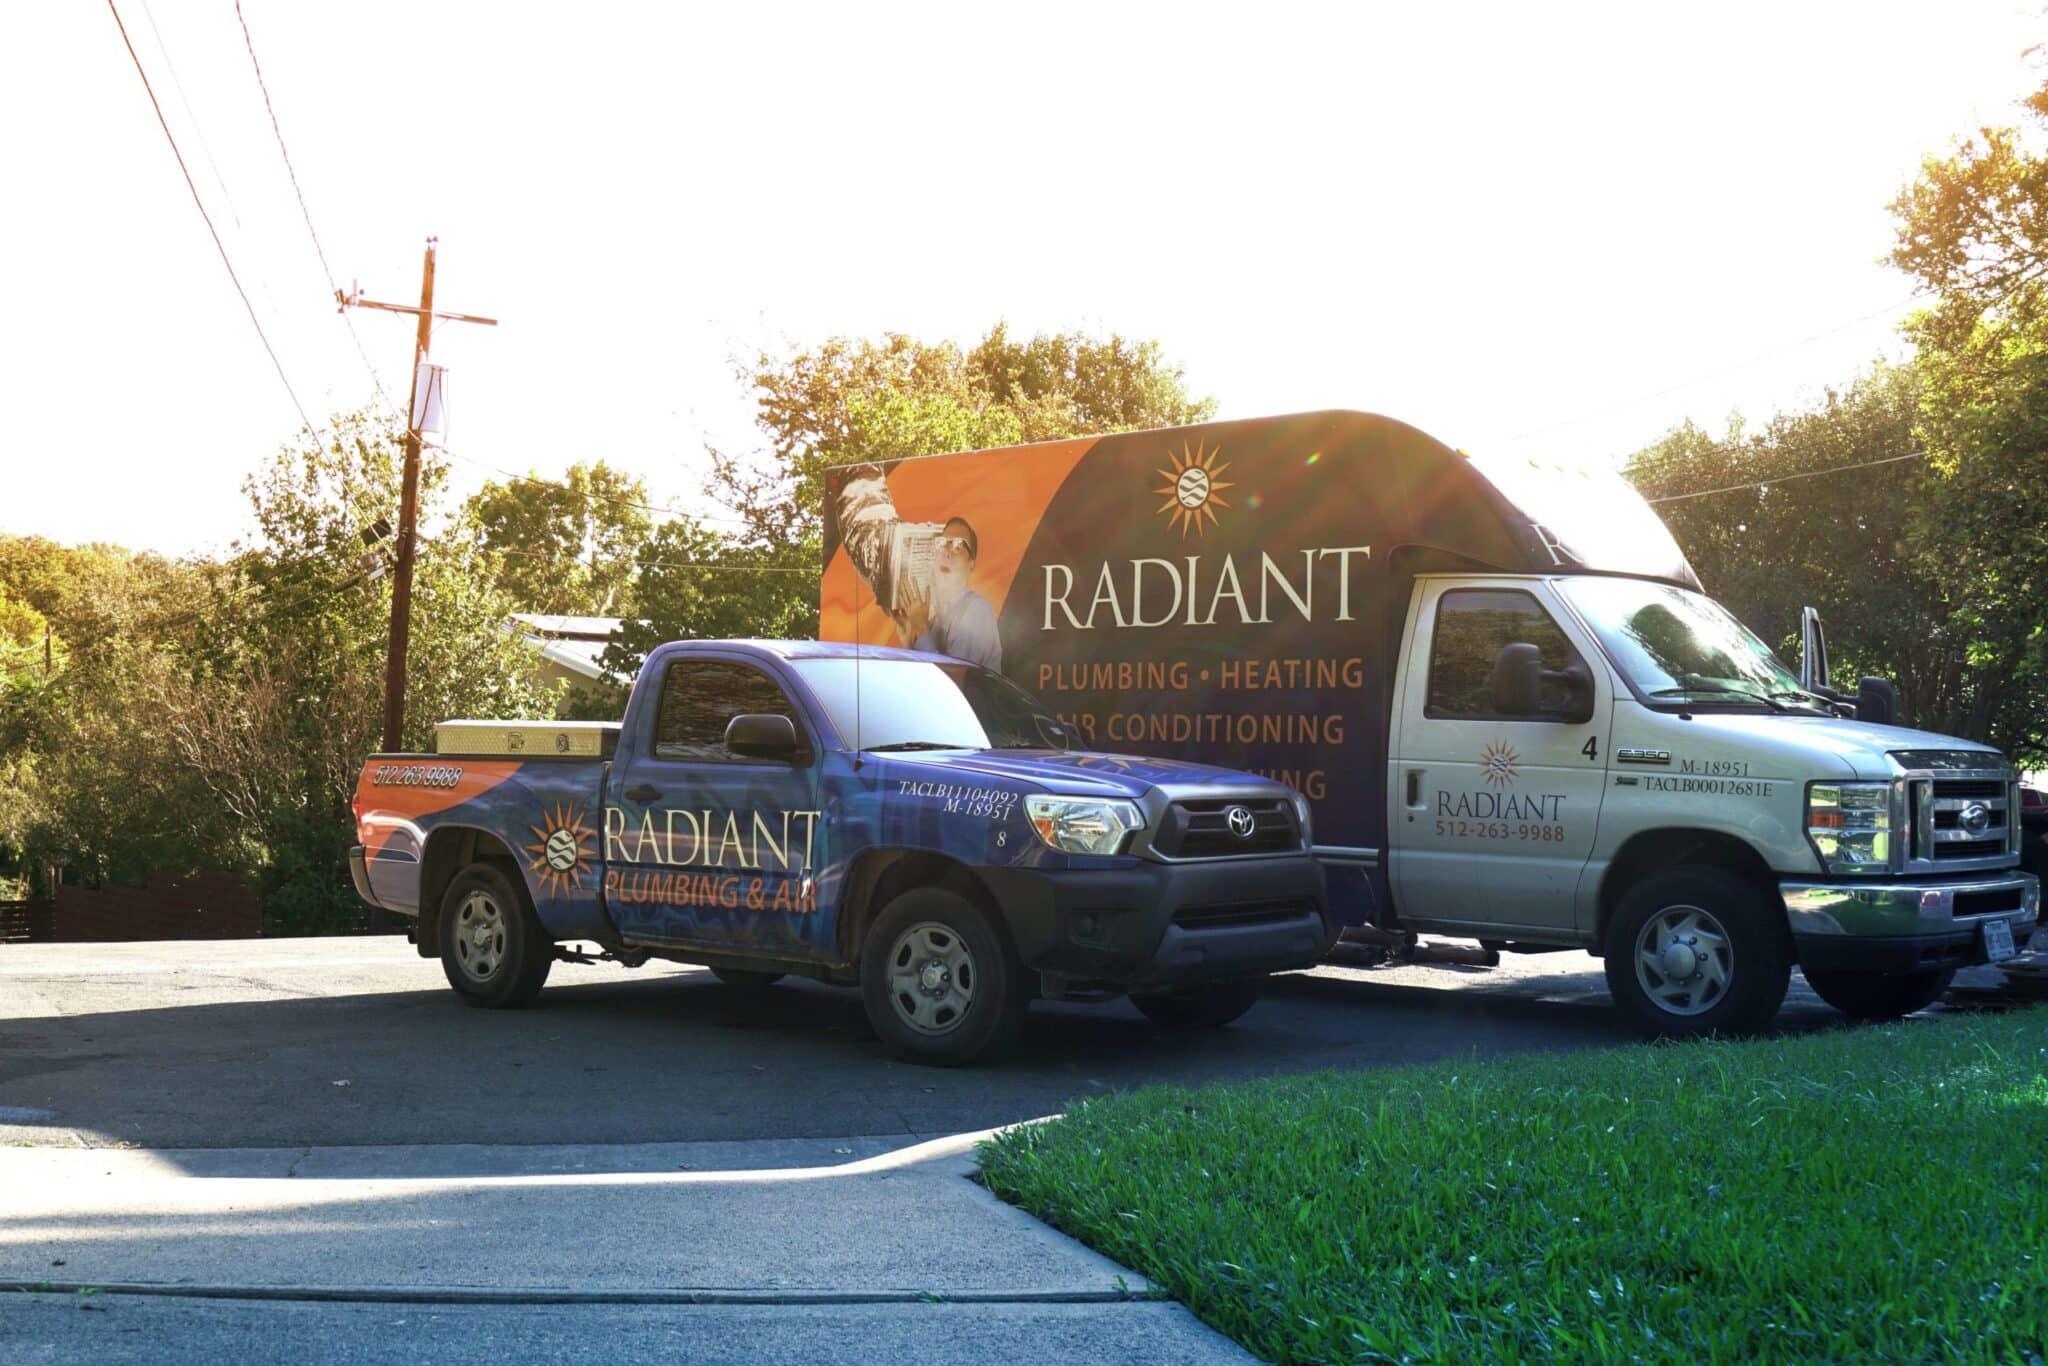 Two Radiant Plumbing trucks parked